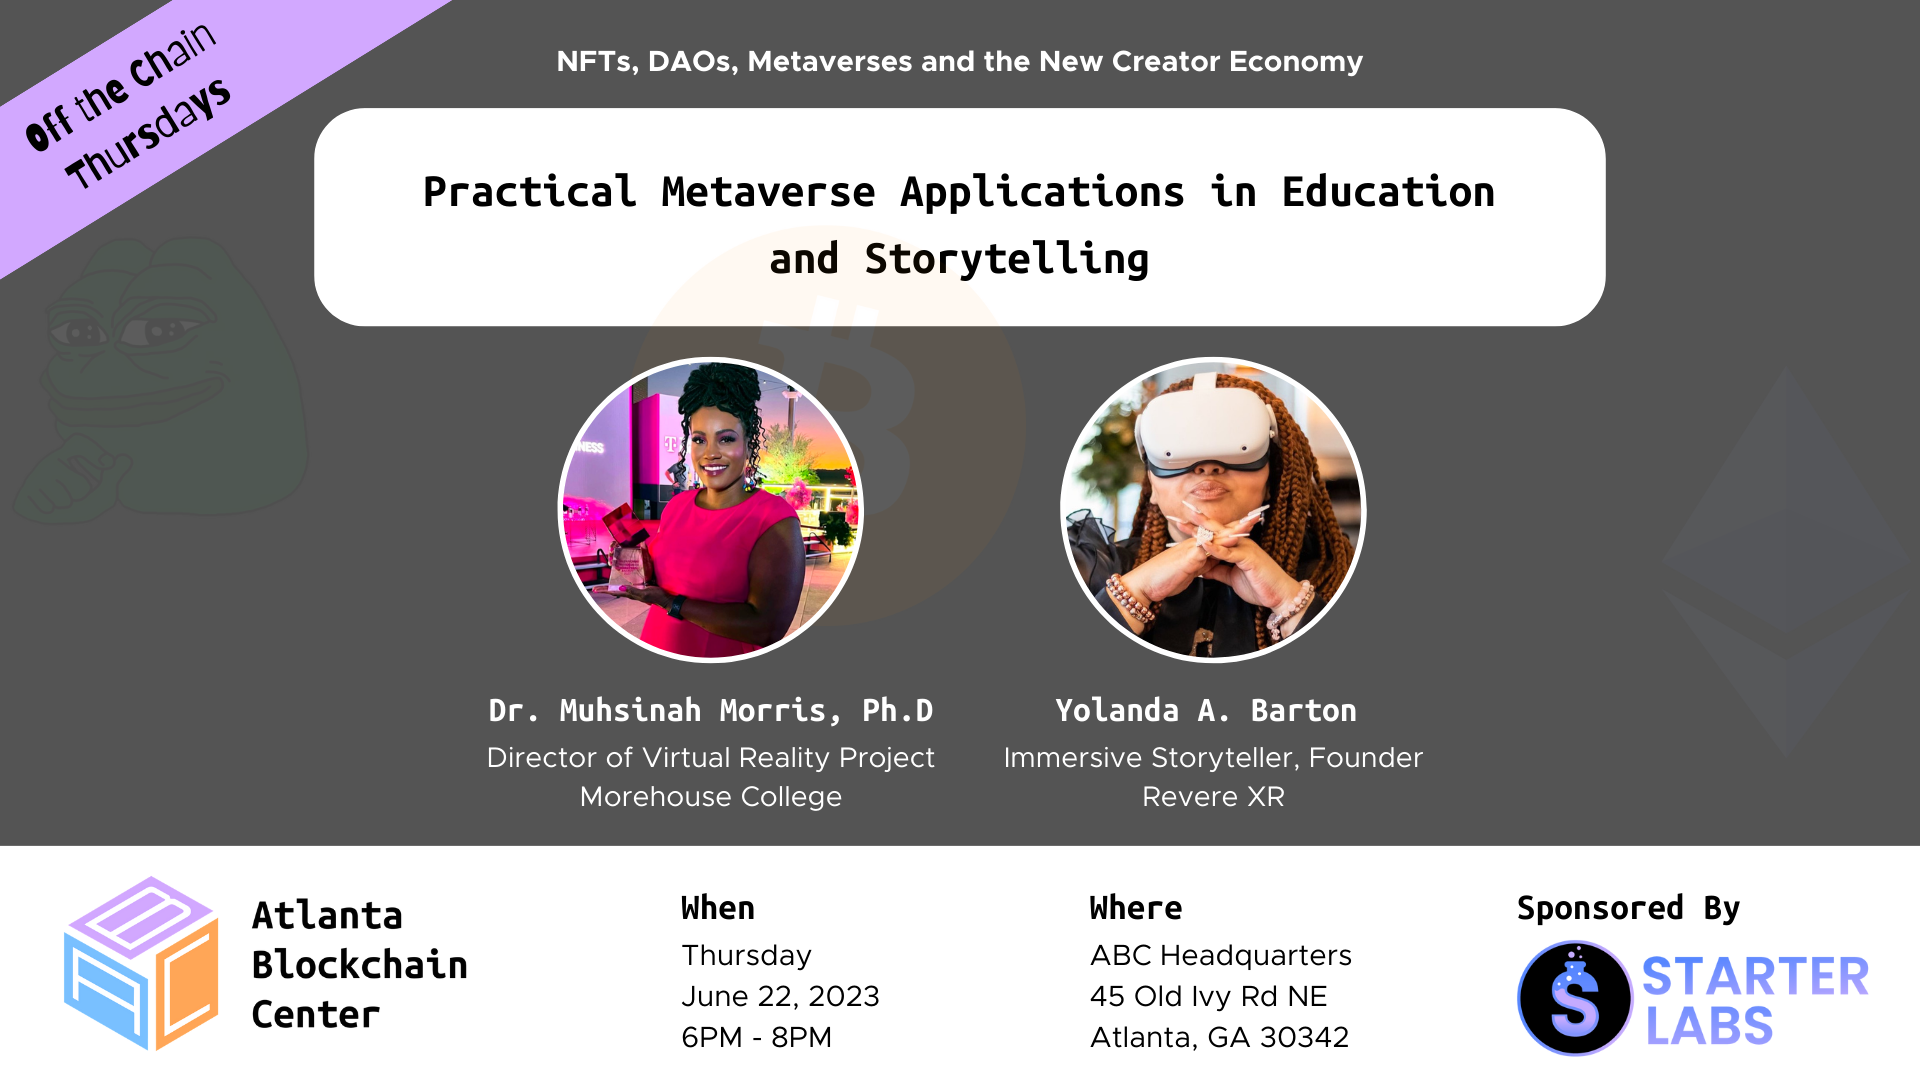 Practical Metaverse Applications in Education and Storytelling